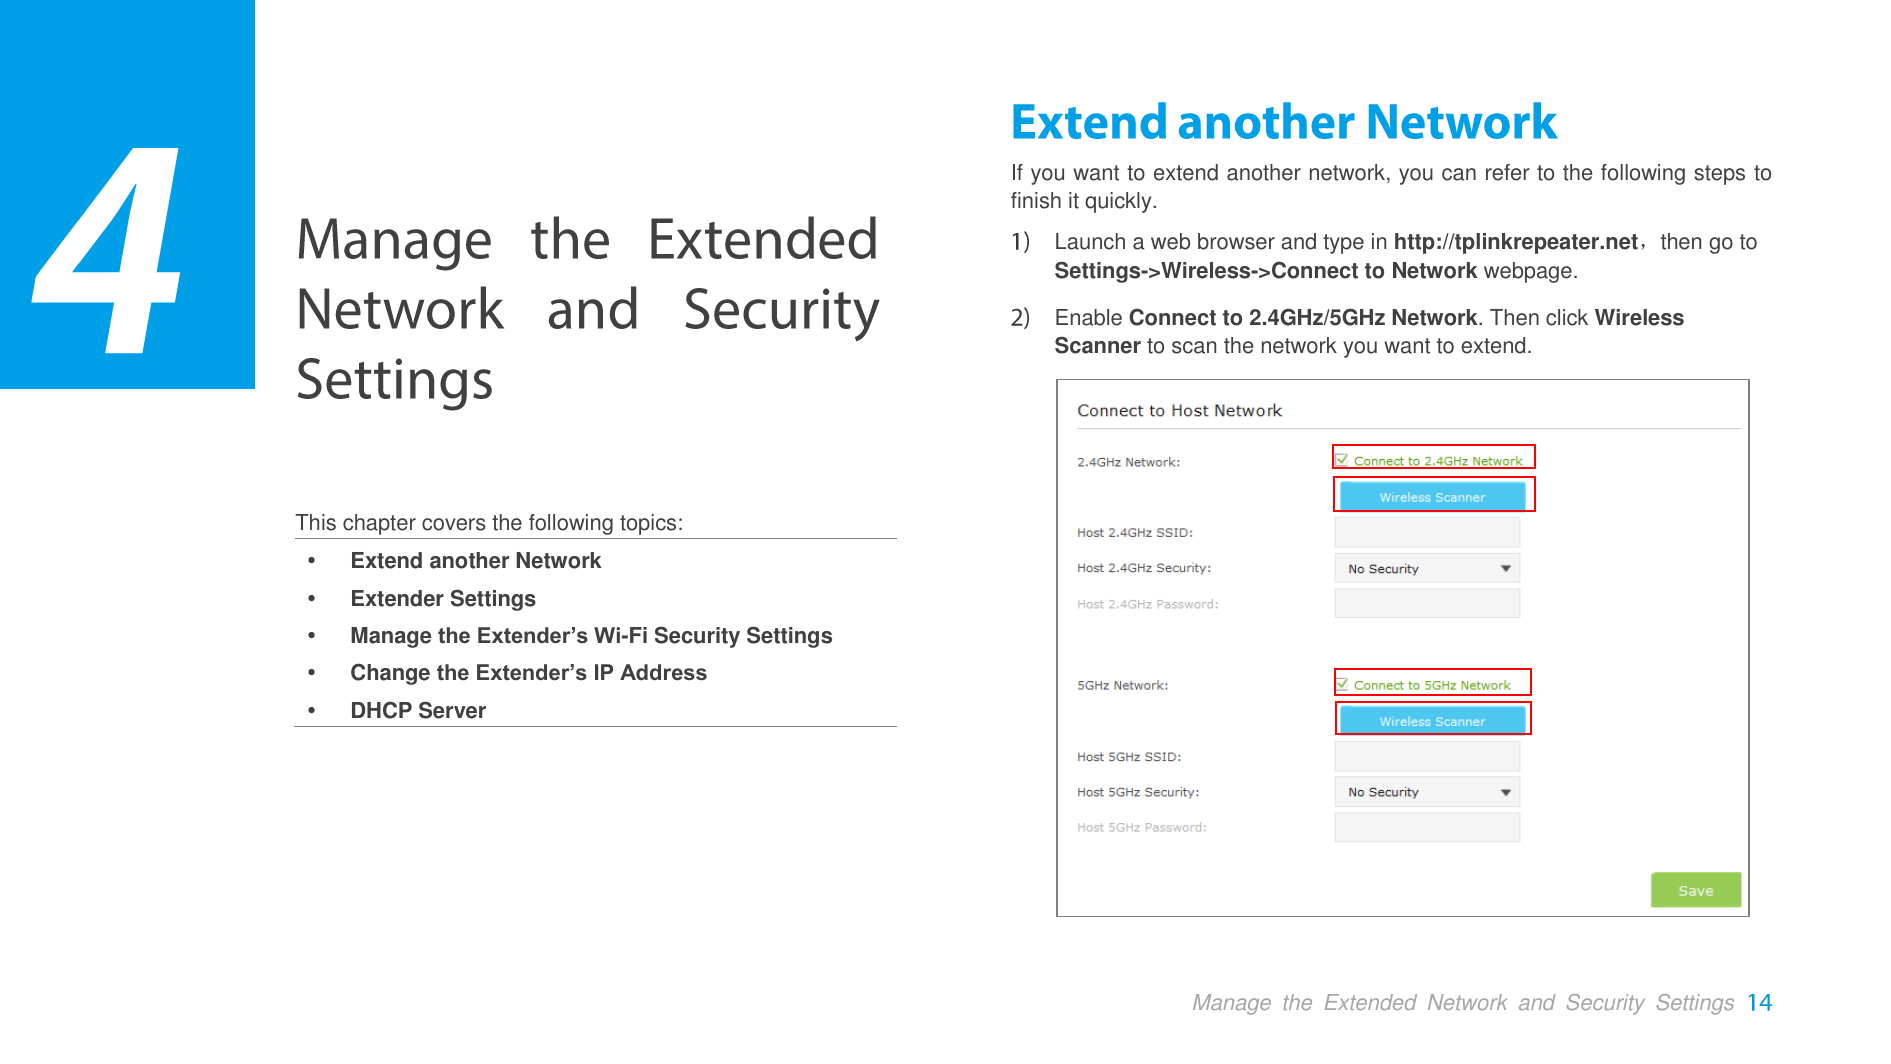  Manage  the  Extended  Network  and  Security  Settings   This chapter covers the following topics:  Extend another Network  Extender Settings  Manage the Extender’s Wi-Fi Security Settings  Change the Extender’s IP Address  DHCP Server If you want to extend another network, you can refer to the following steps to finish it quickly.  Launch a web browser and type in http://tplinkrepeater.net，then go to Settings-&gt;Wireless-&gt;Connect to Network webpage.  Enable Connect to 2.4GHz/5GHz Network. Then click Wireless Scanner to scan the network you want to extend.   3 